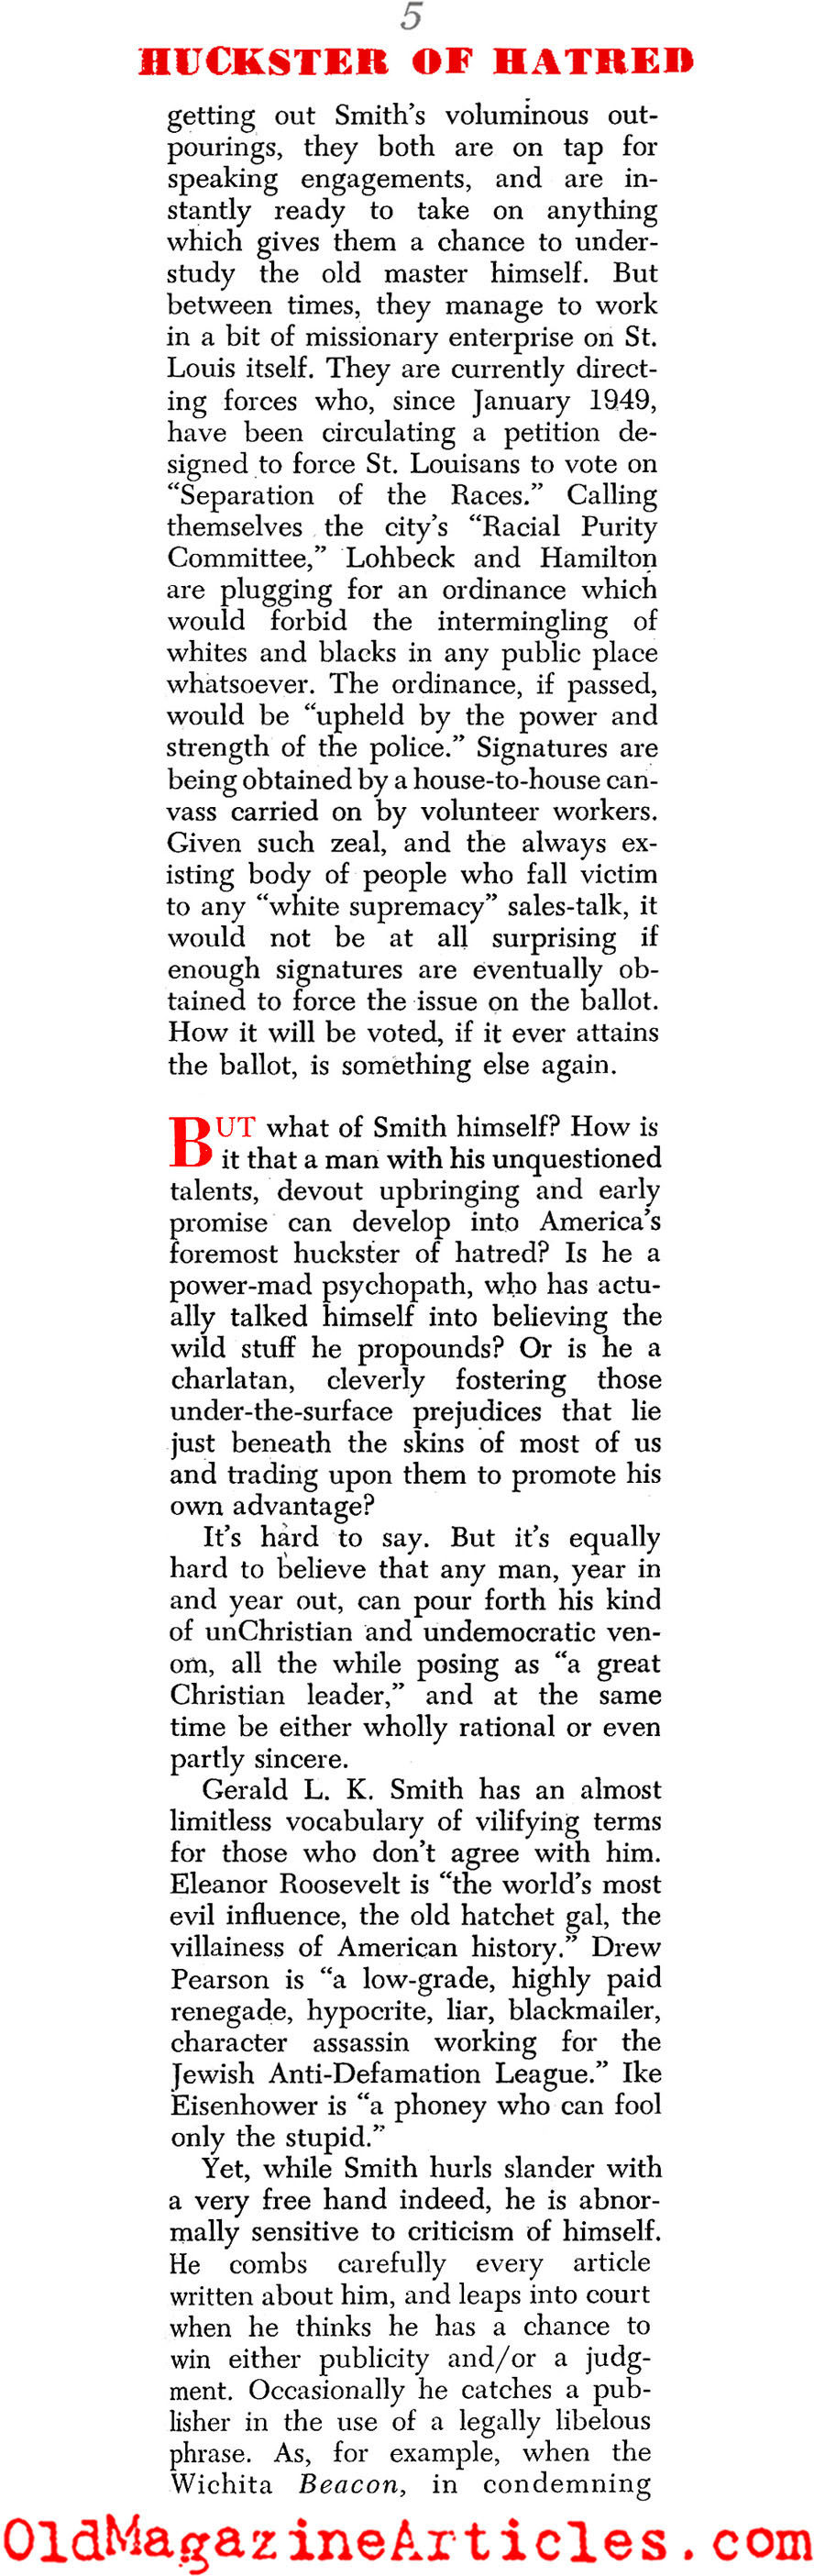 Christian Nationalism: the First Go-Round (Christian Herald Magazine, 1950)